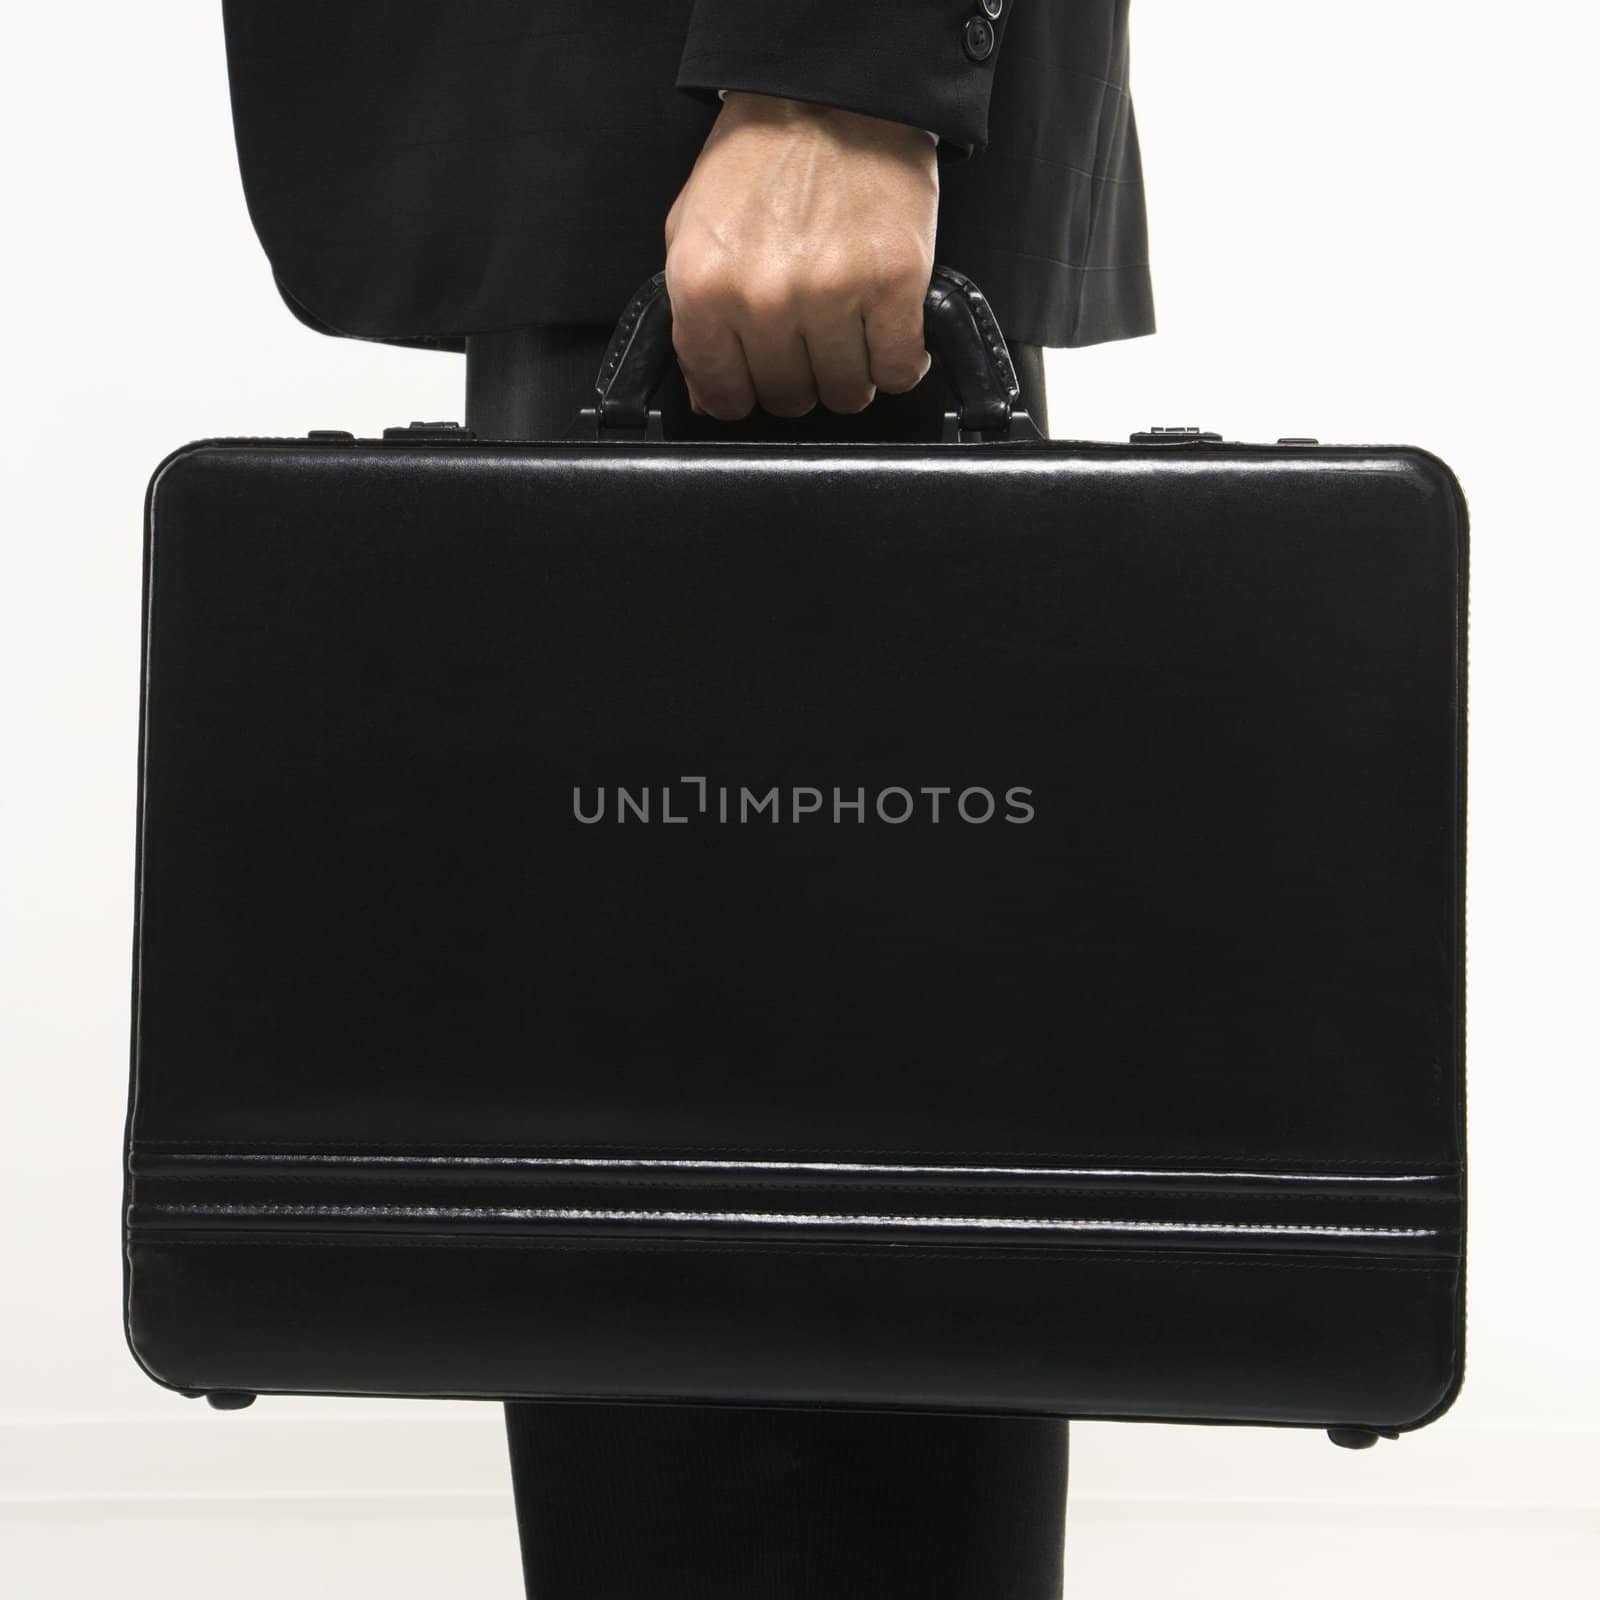 Caucasian mid-adult man's hand holding briefcase.